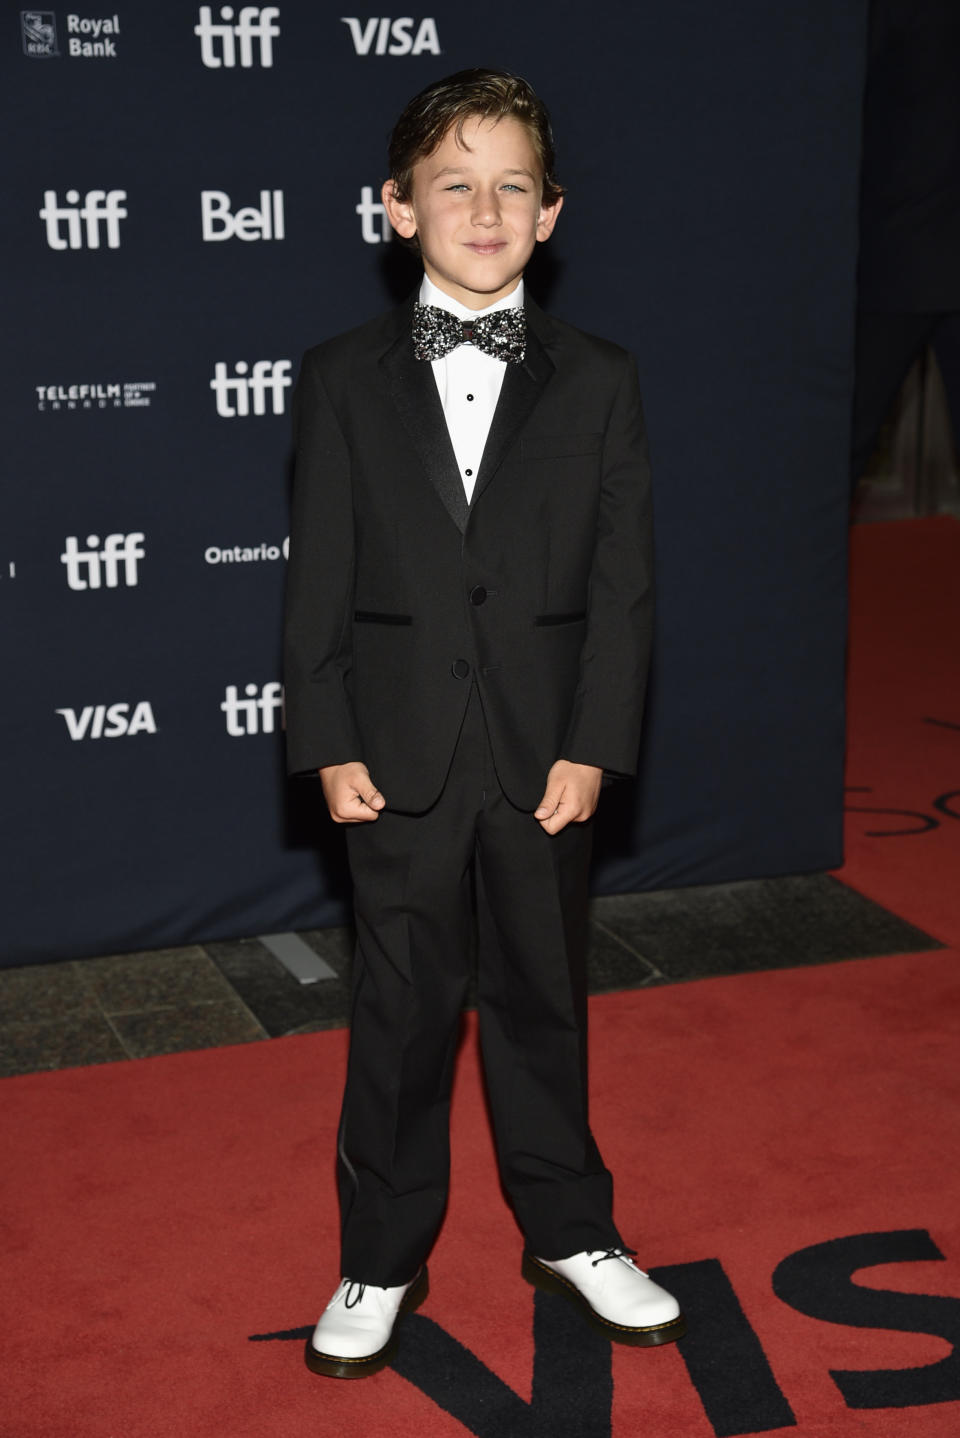 Mateo Zoryon Francis-DeFord attends the premiere of "The Fabelmans" at the Princess of Wales Theatre during the Toronto International Film Festival, Saturday, Sept. 10, 2022, in Toronto. (Photo by Evan Agostini/Invision/AP)